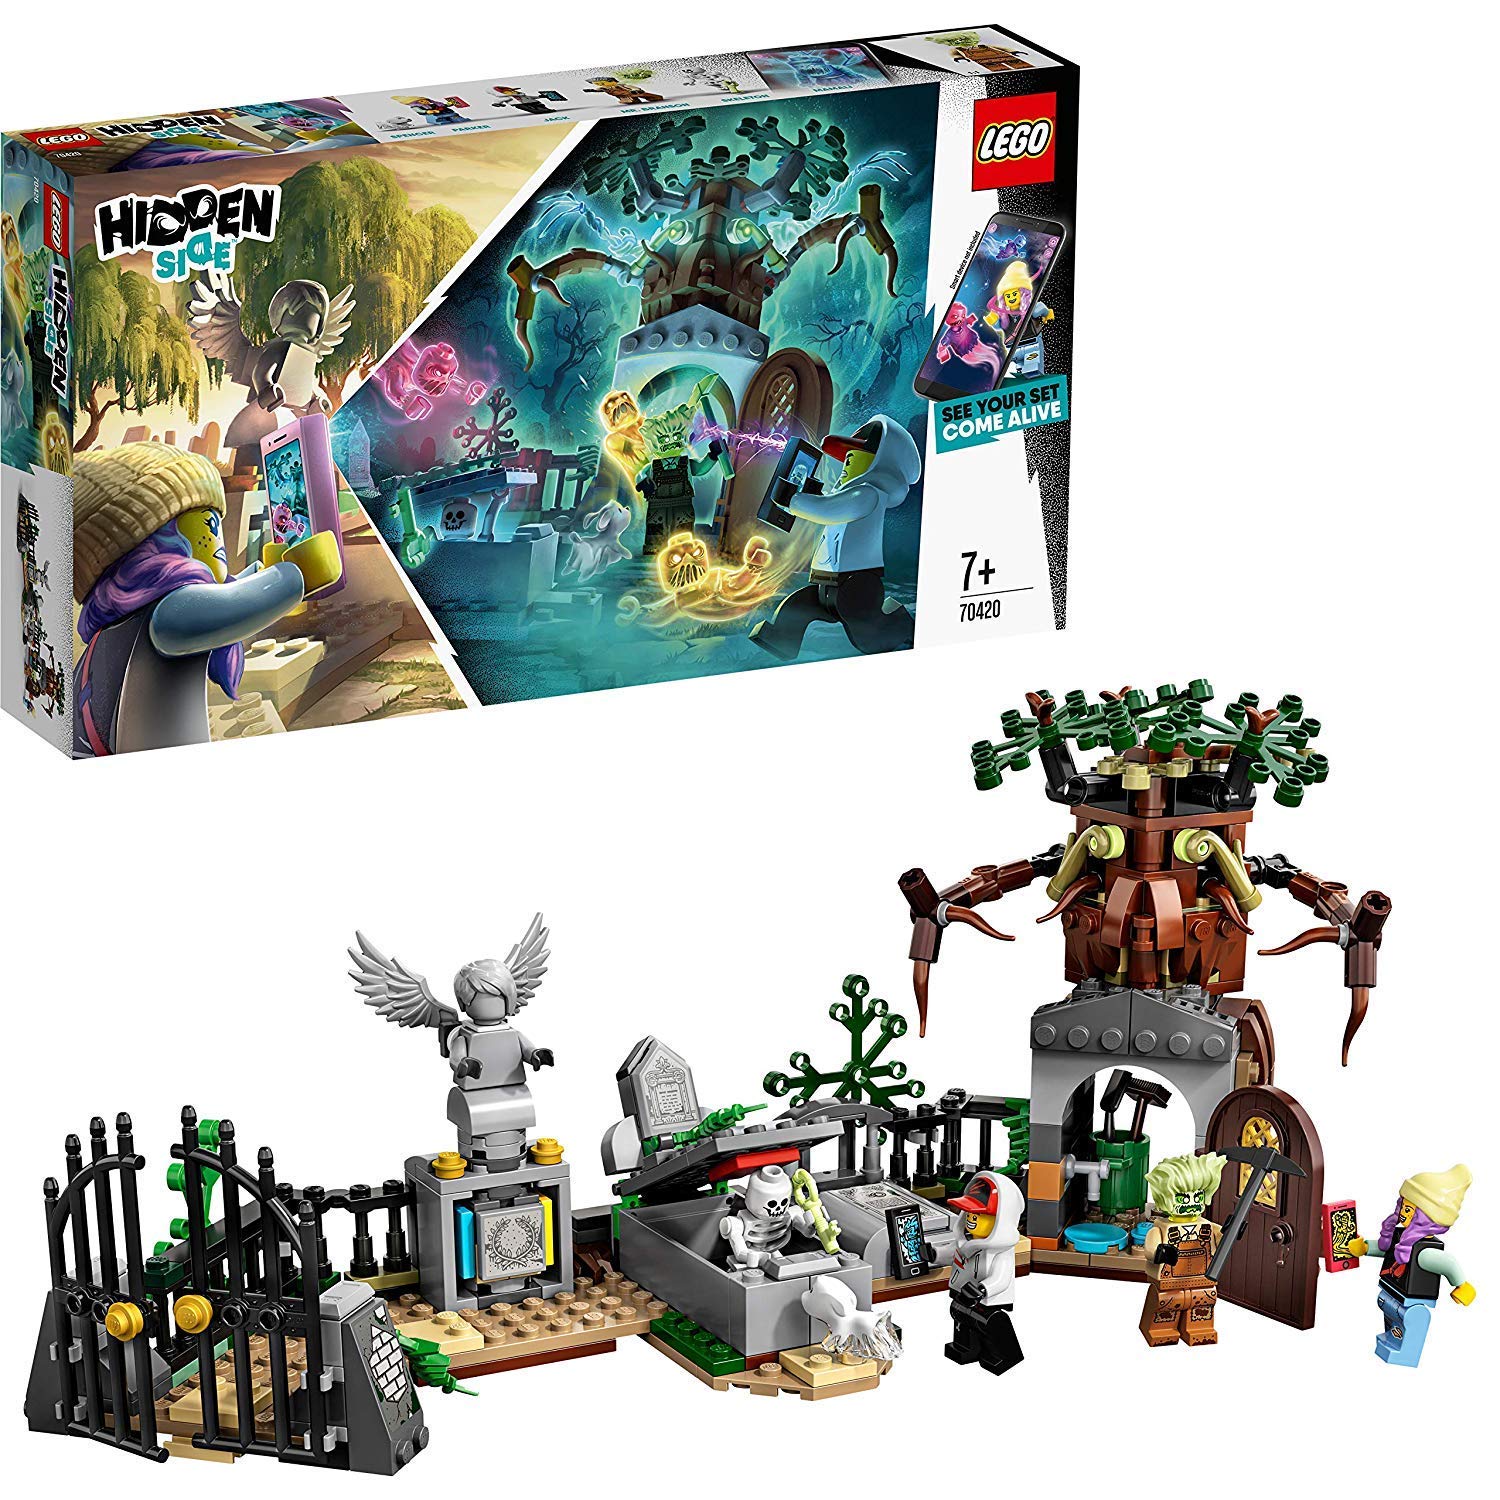 Lego 70420 Hidden Side Mystery In The Graveyard Toy For Children With Augme